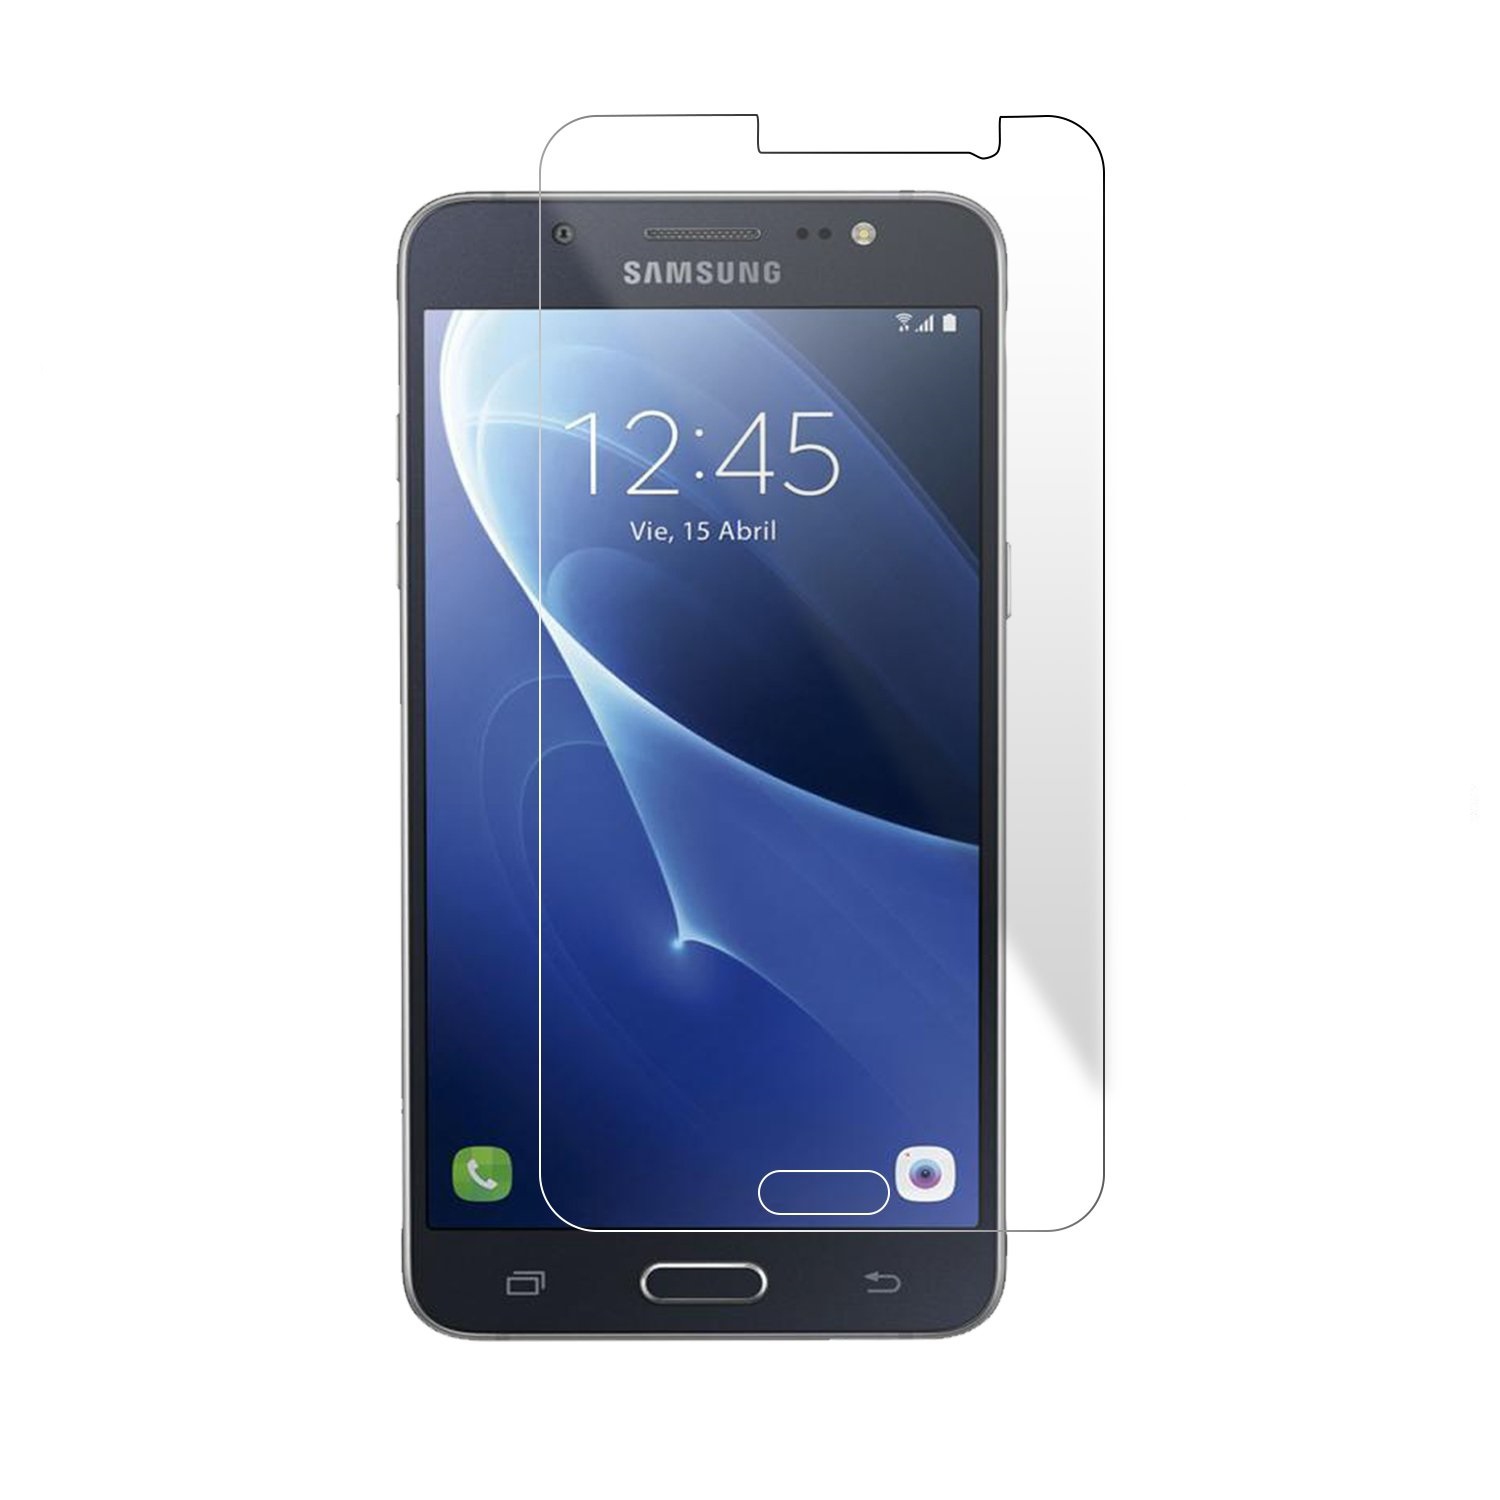 【2 Packs】 CSmart Premium Tempered Glass Screen Protector for Samsung Galaxy J5 2016, Case Friendly & Bubble Free